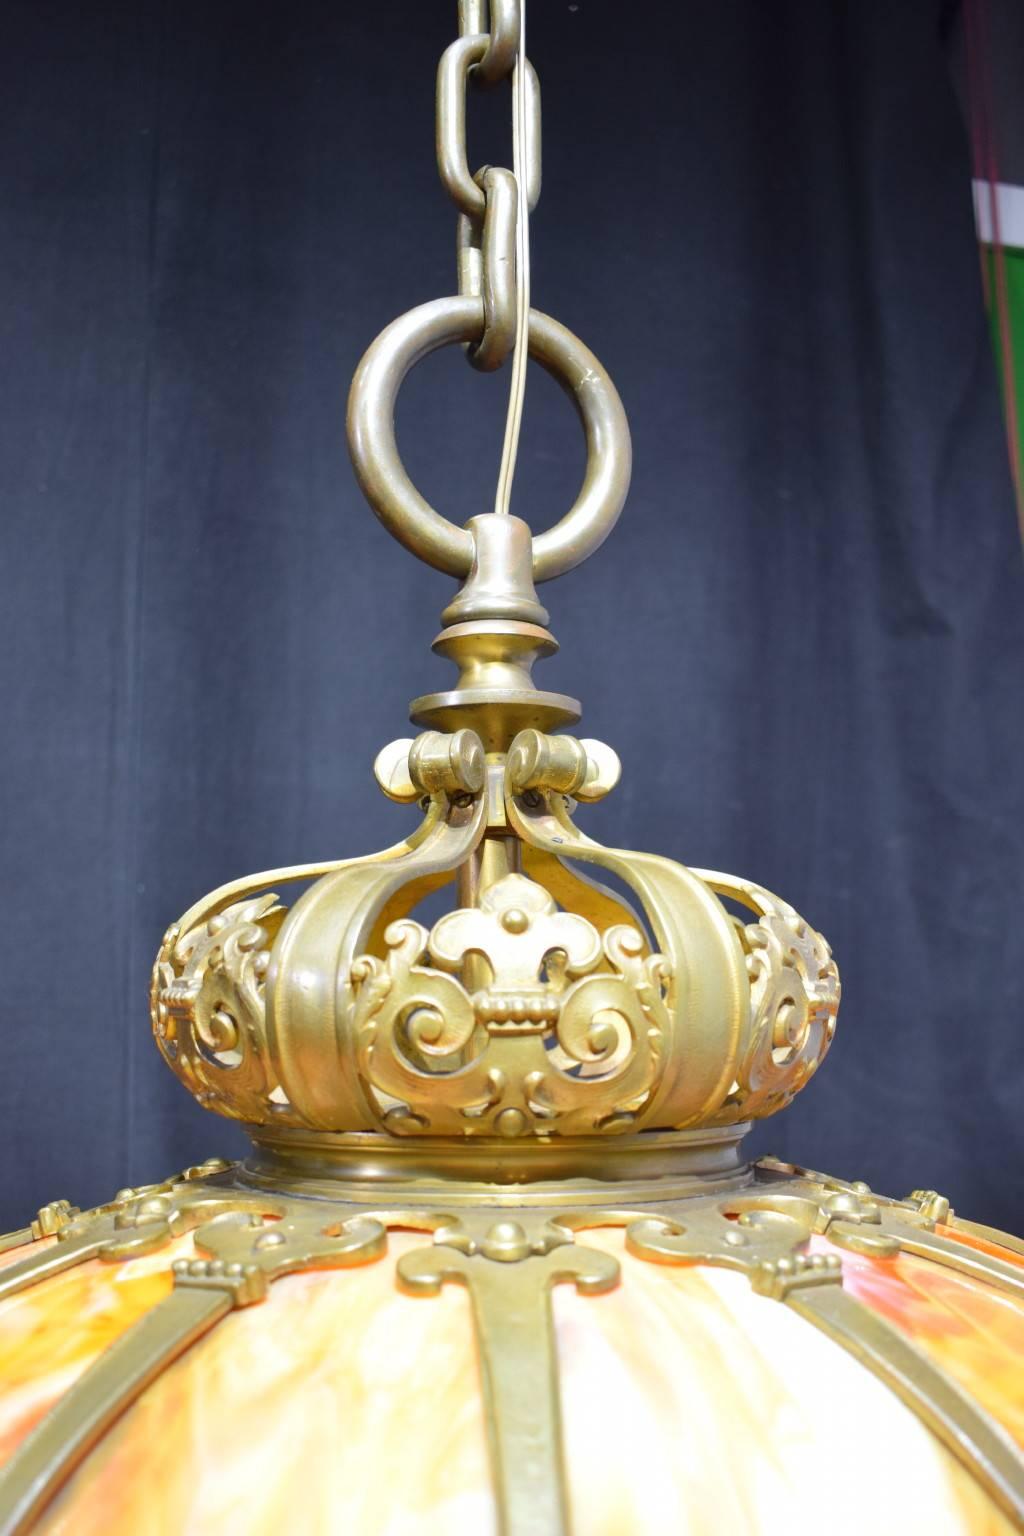 Very fine gilt bronze and slag glass hanging lamp attributed to Duffner and Kimberly. This firm made these types of lamps for a very short period in the early 1900s. Six internal lights.
https://en.wikipedia.org/wiki/Duffner_and_Kimberly.